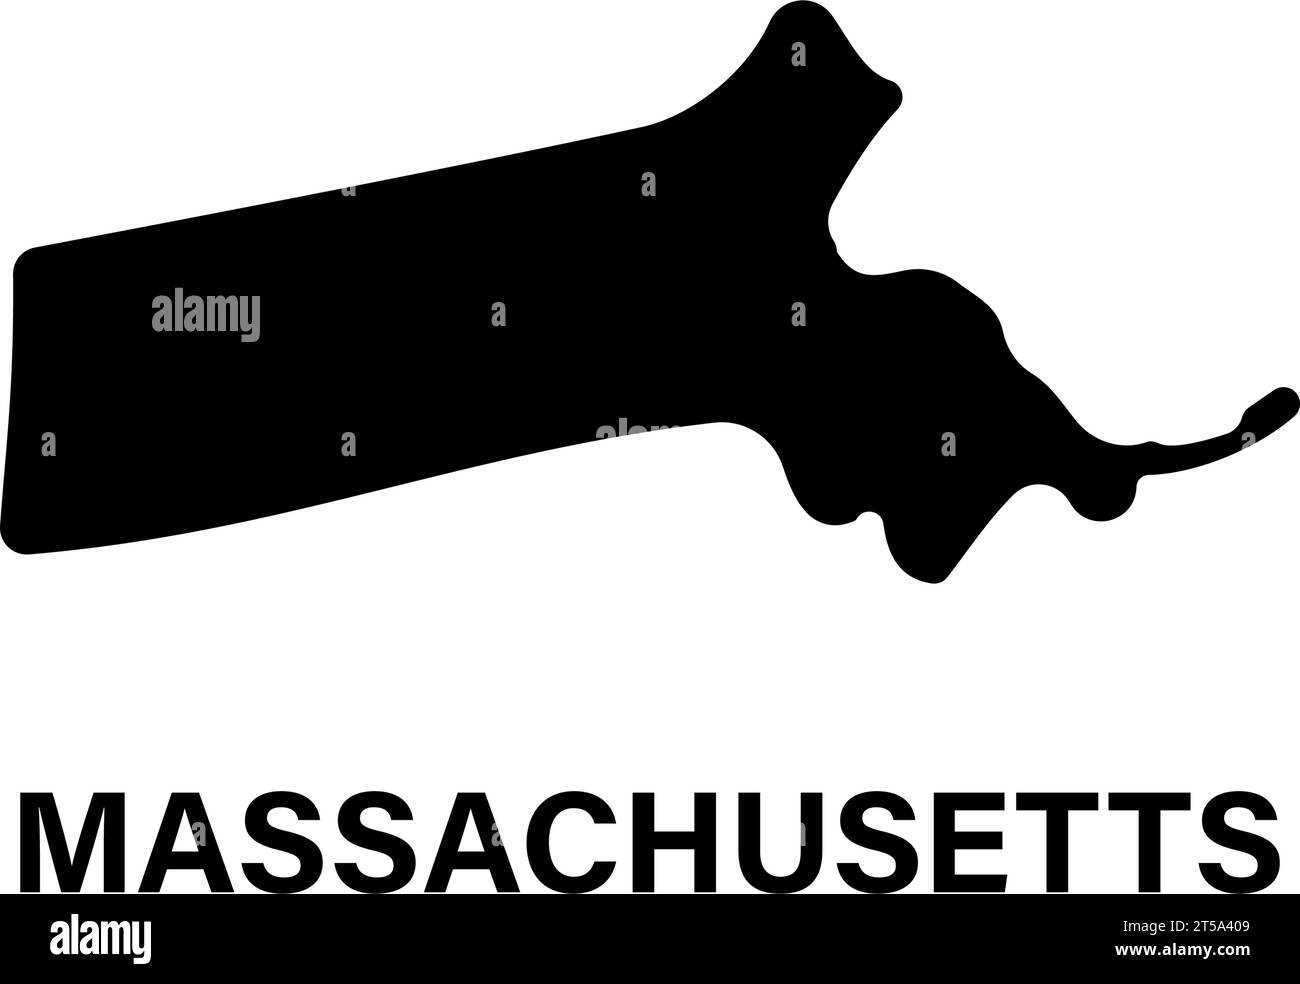 Massachusetts state map silhouette icon Stock Vector